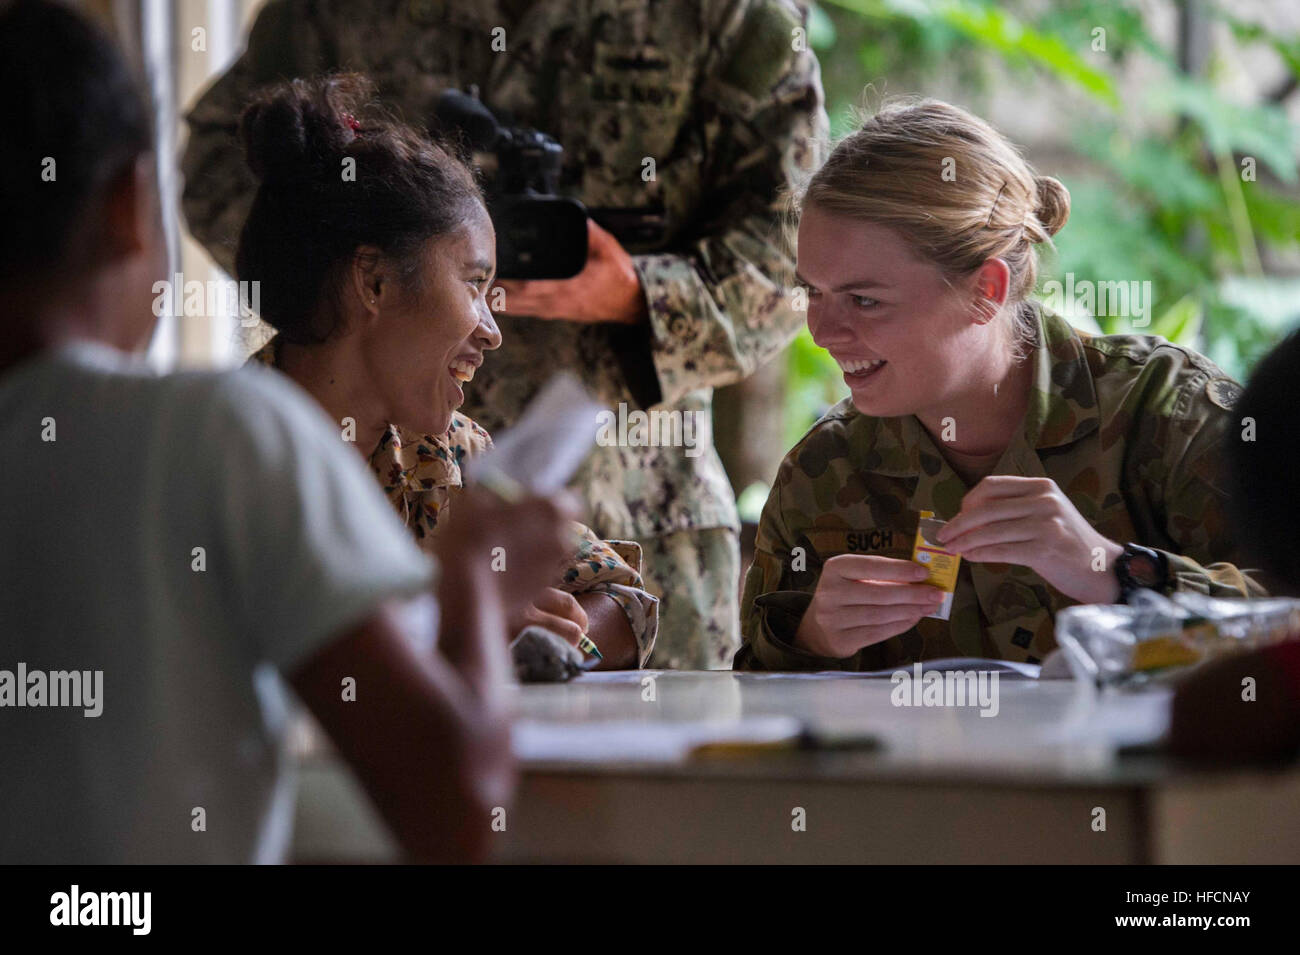 alien elleve Belønning Australian Army Capt. Nicole Such, right, plays with a Timorese resident at  the Santa Bakhita orphanage in Dili, East Timor, June 21, 2014, during a  visit in support of Pacific Partnership 2014.